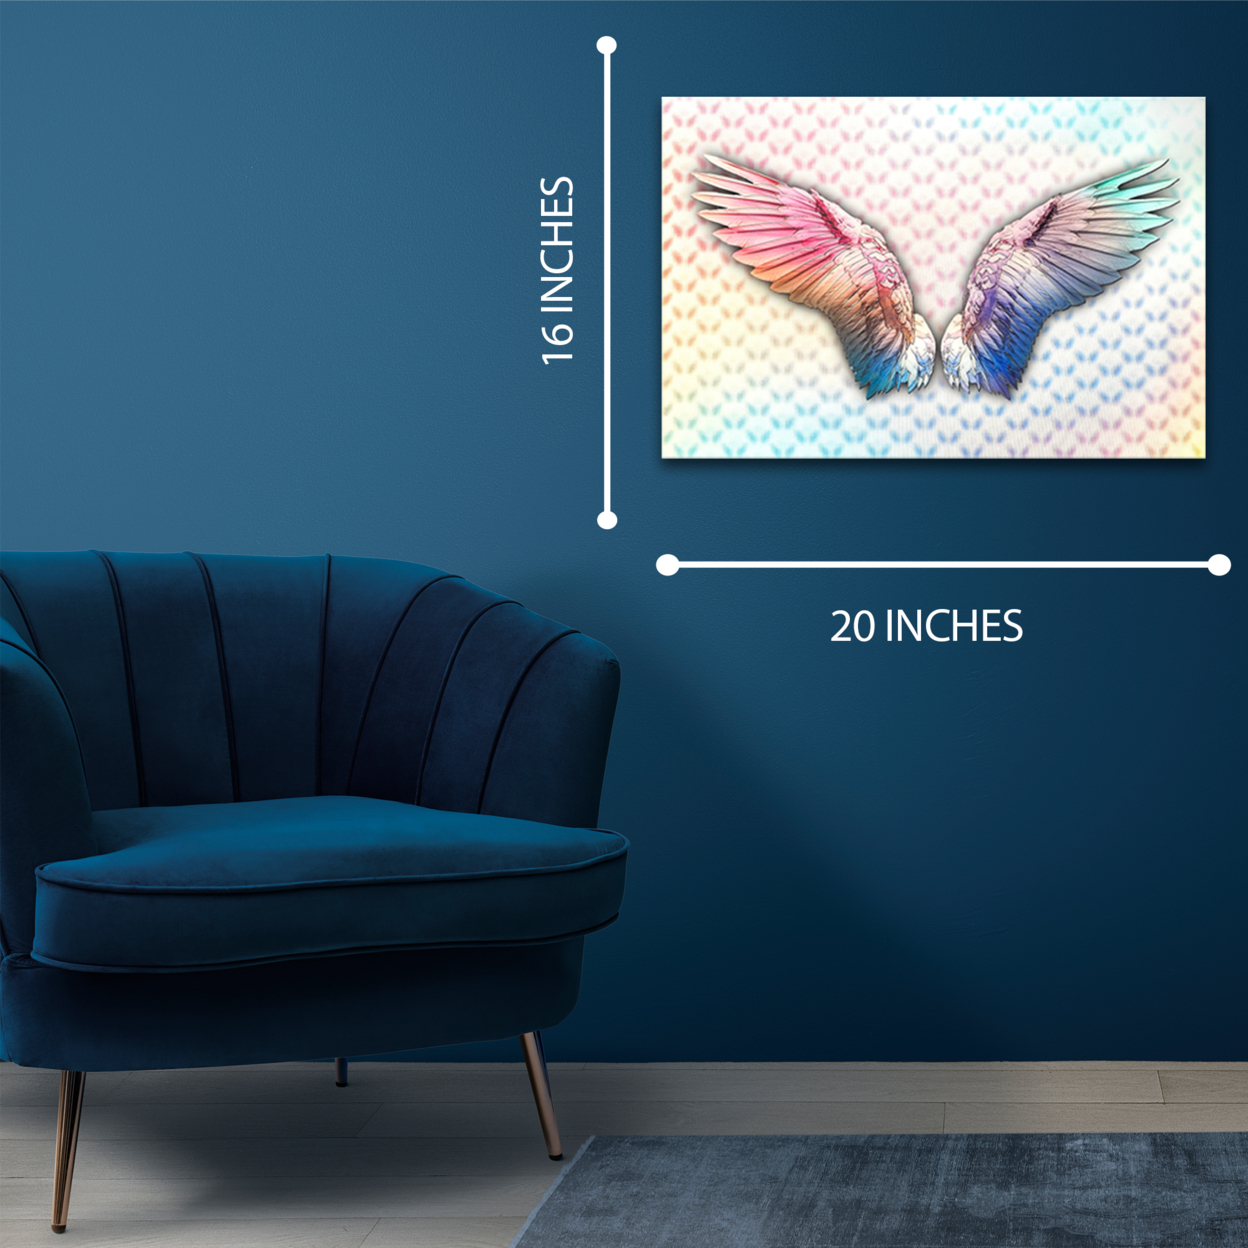 5D Multi-Dimensional Wall Art - Custom Made Angel Wings Wall Art Print On Strong Polycarbonate Panel W/ Vibrant Colors By Matashi (16x20 In)